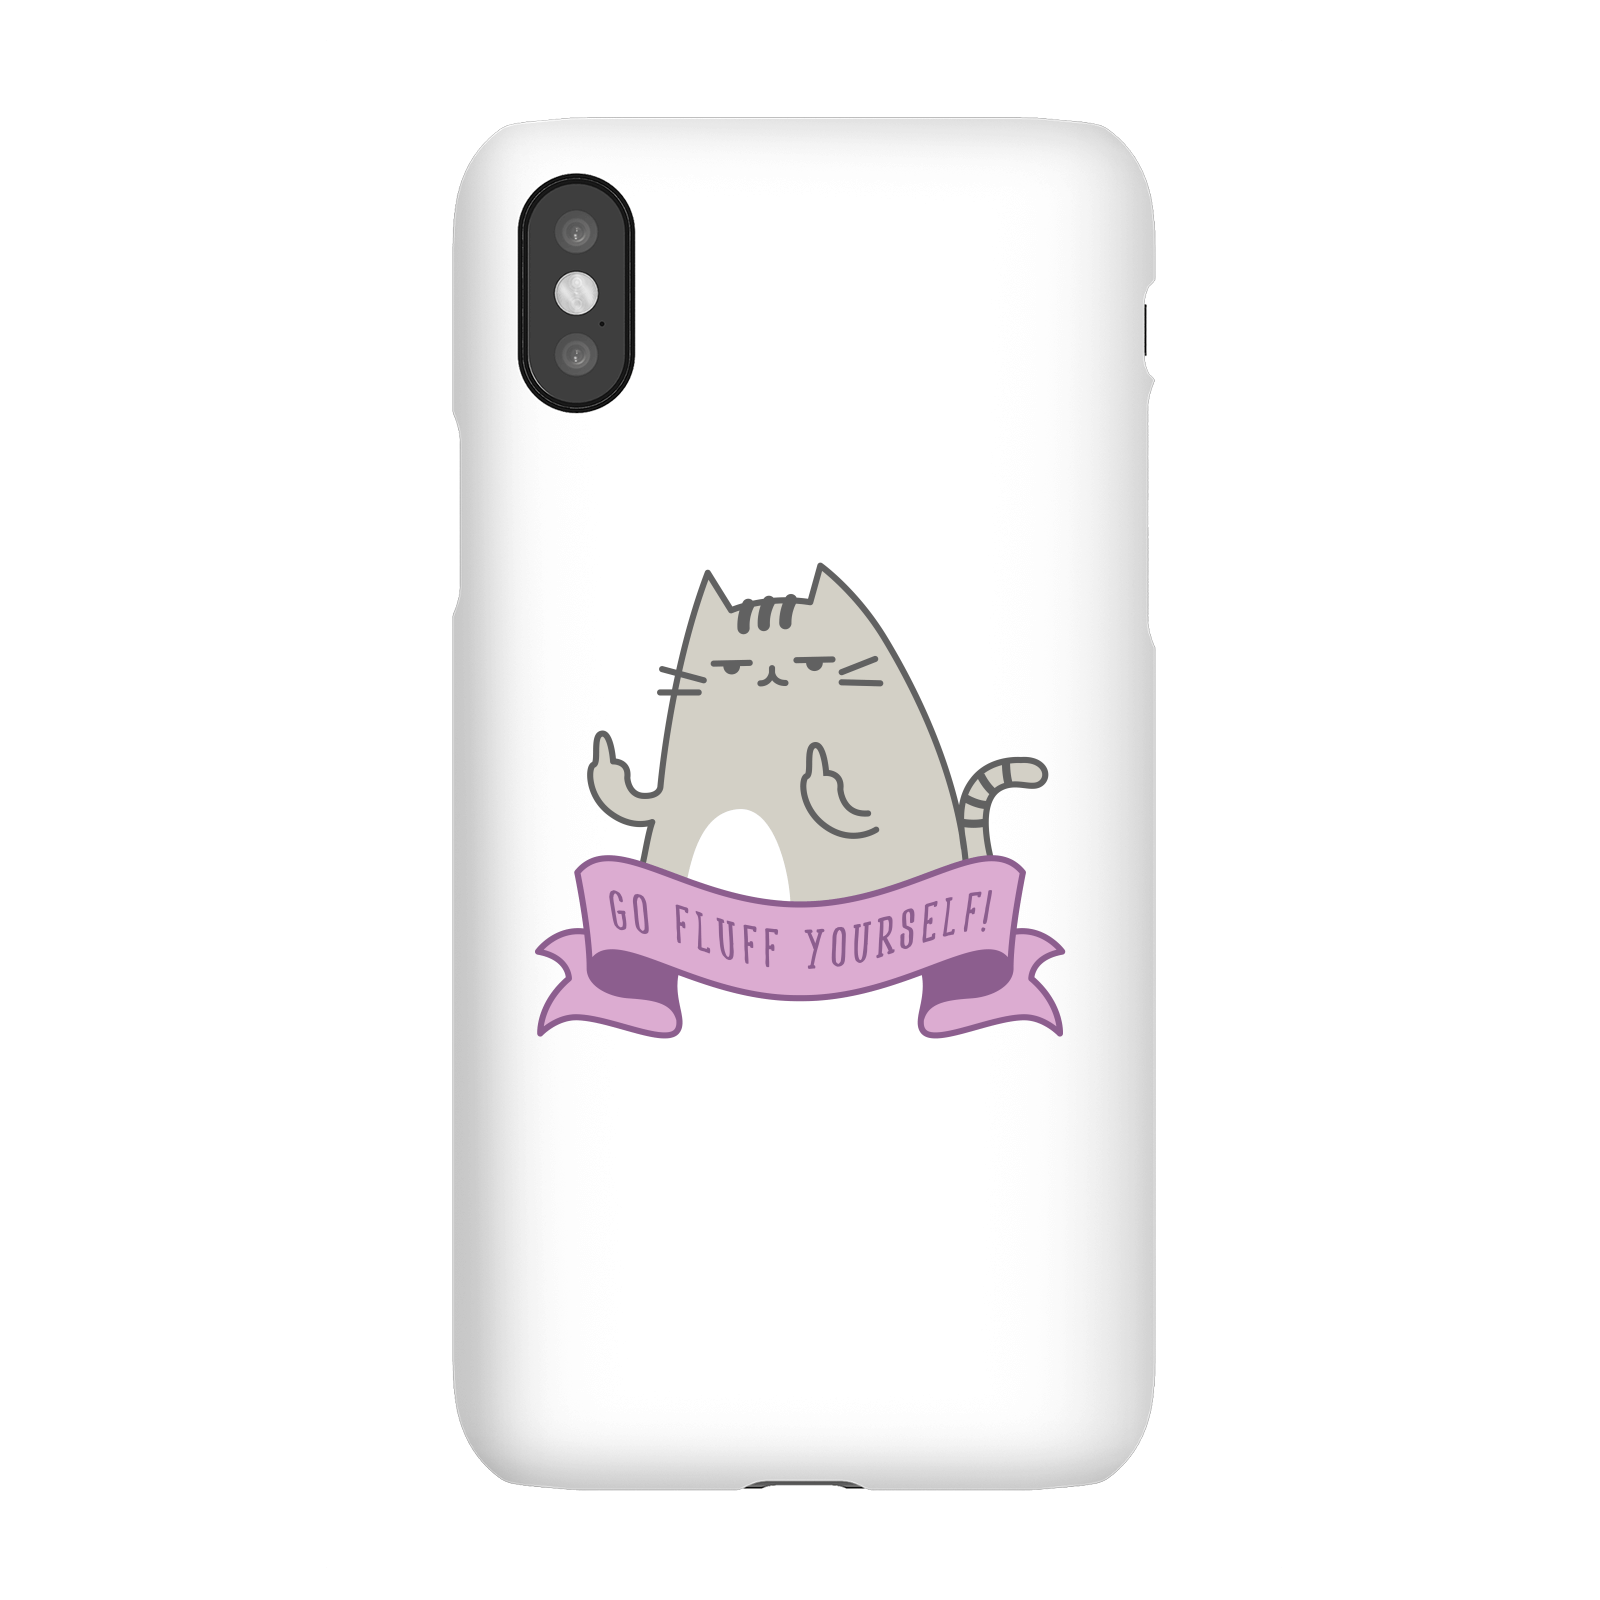 Go Fluff Yourself! Phone Case for iPhone and Android - iPhone X - Snap Case - Matte